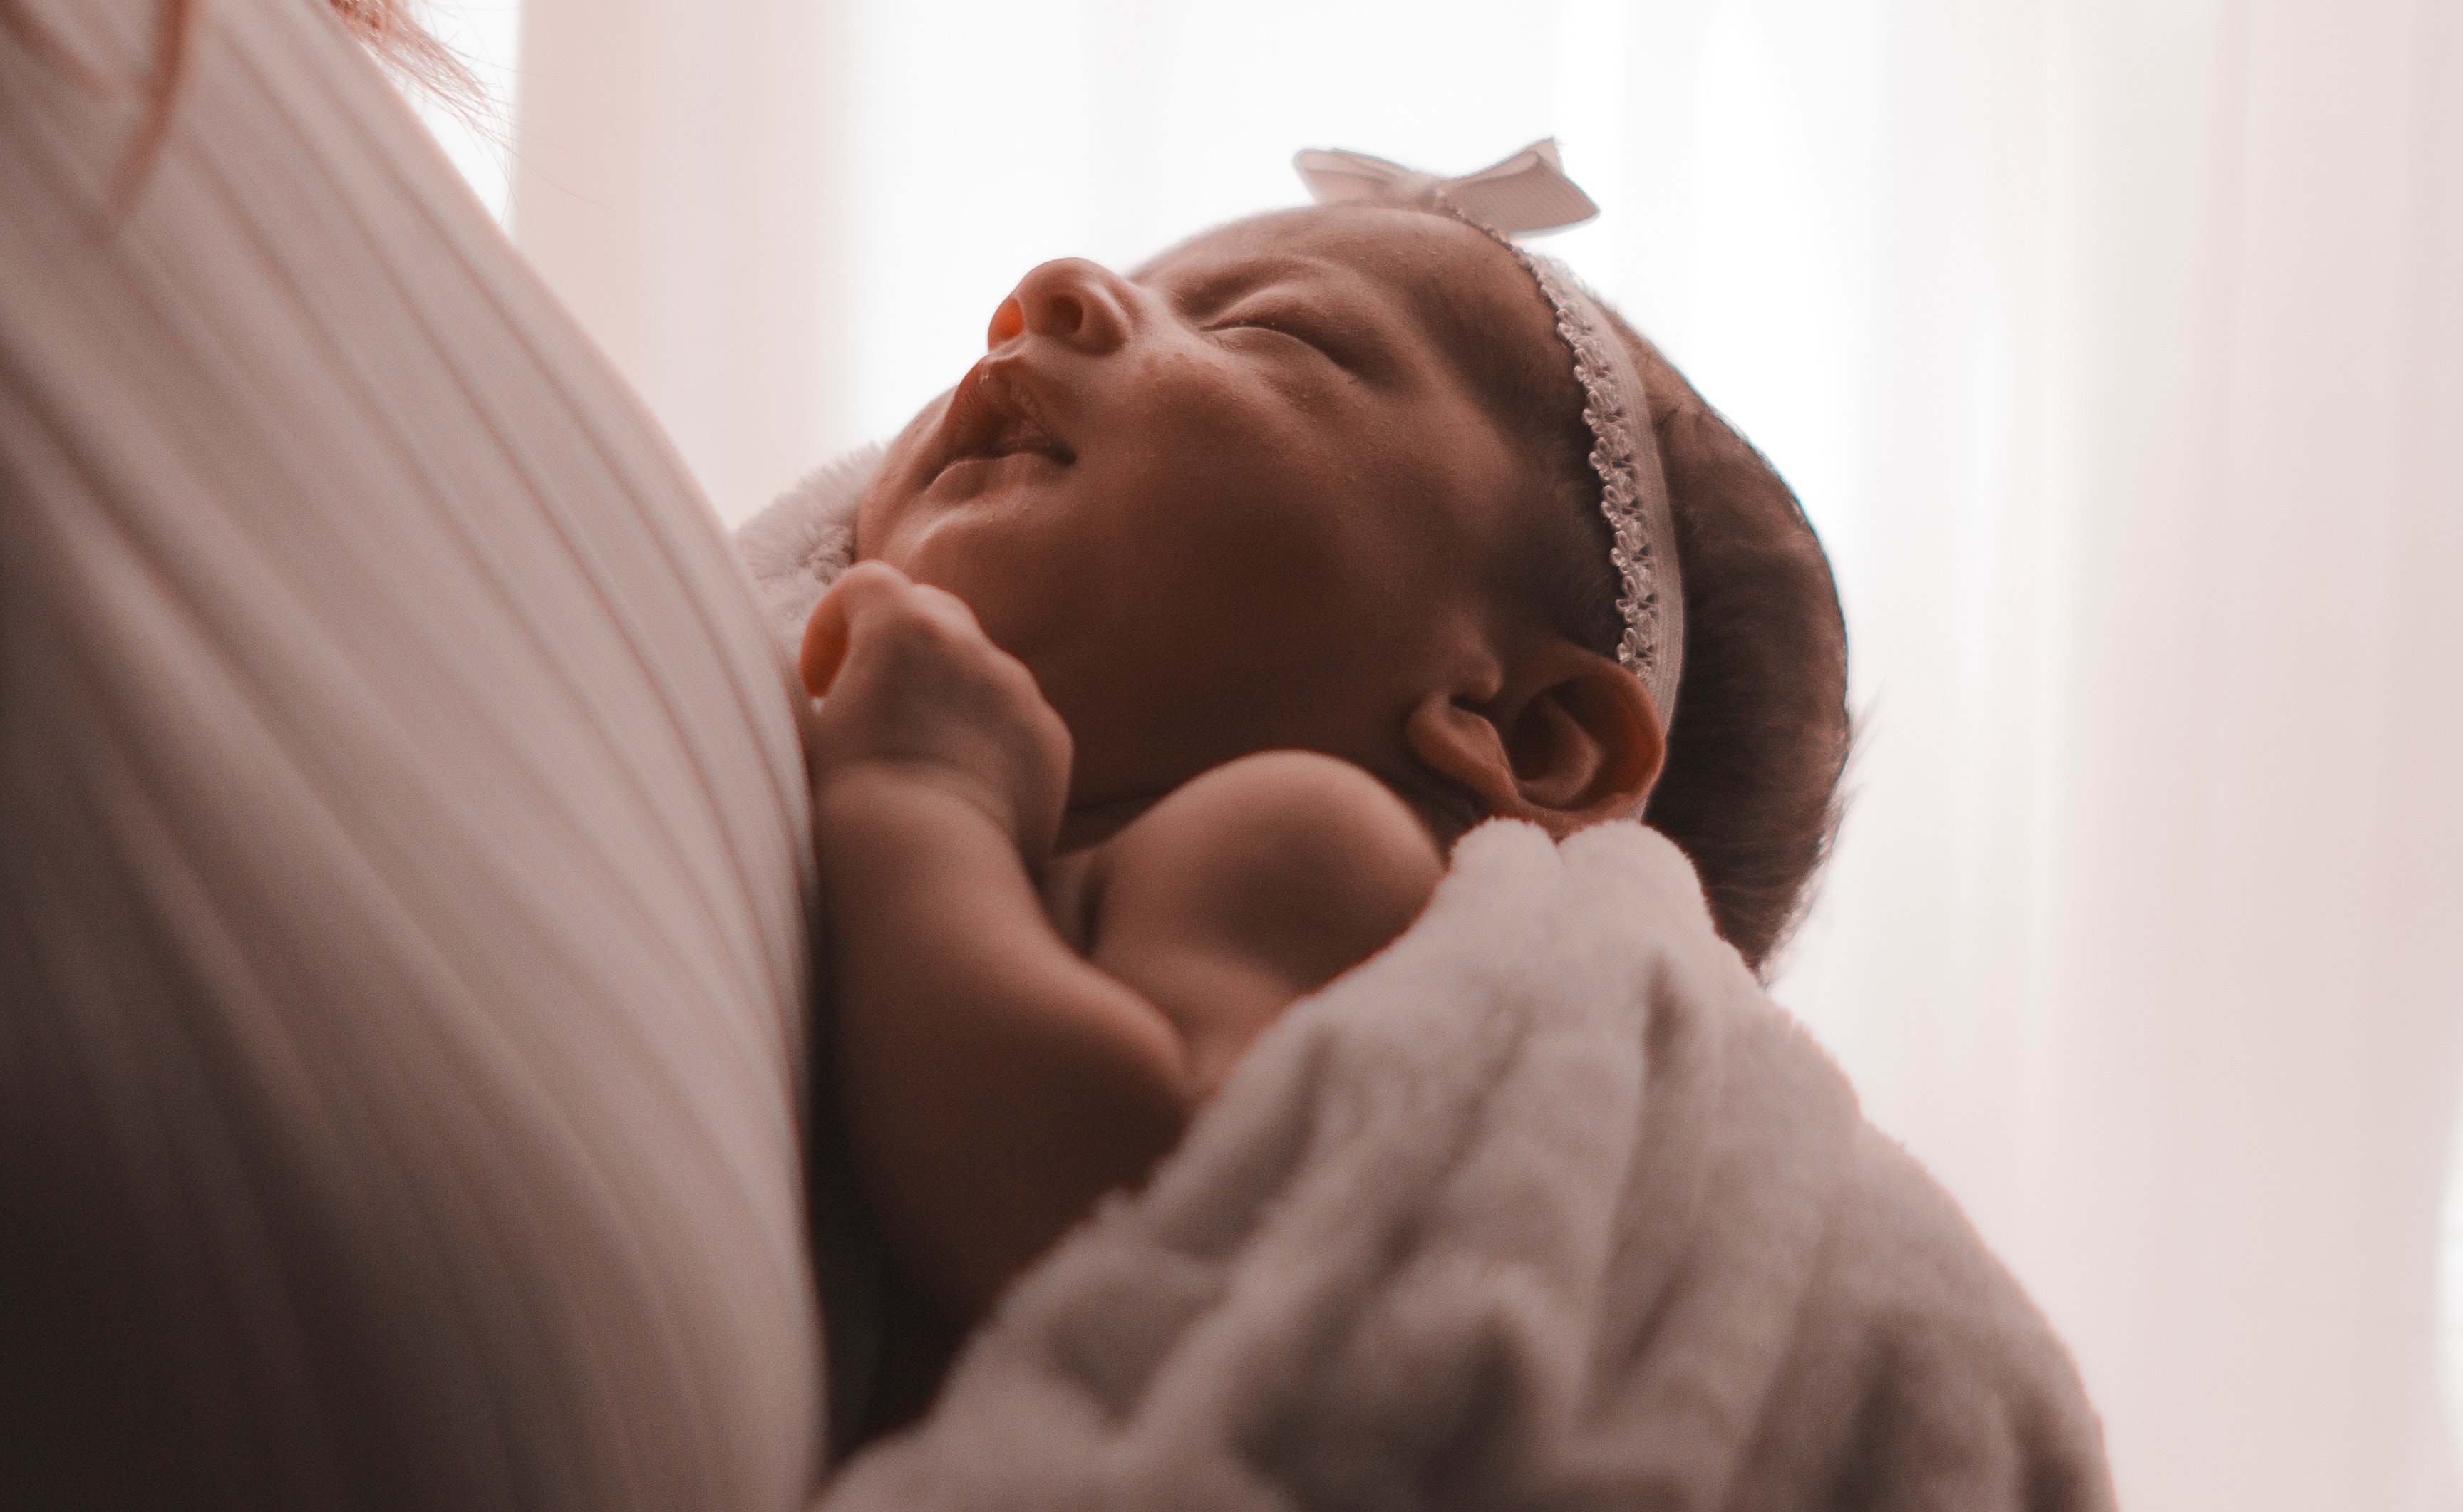 A baby girl | Source: Pexels